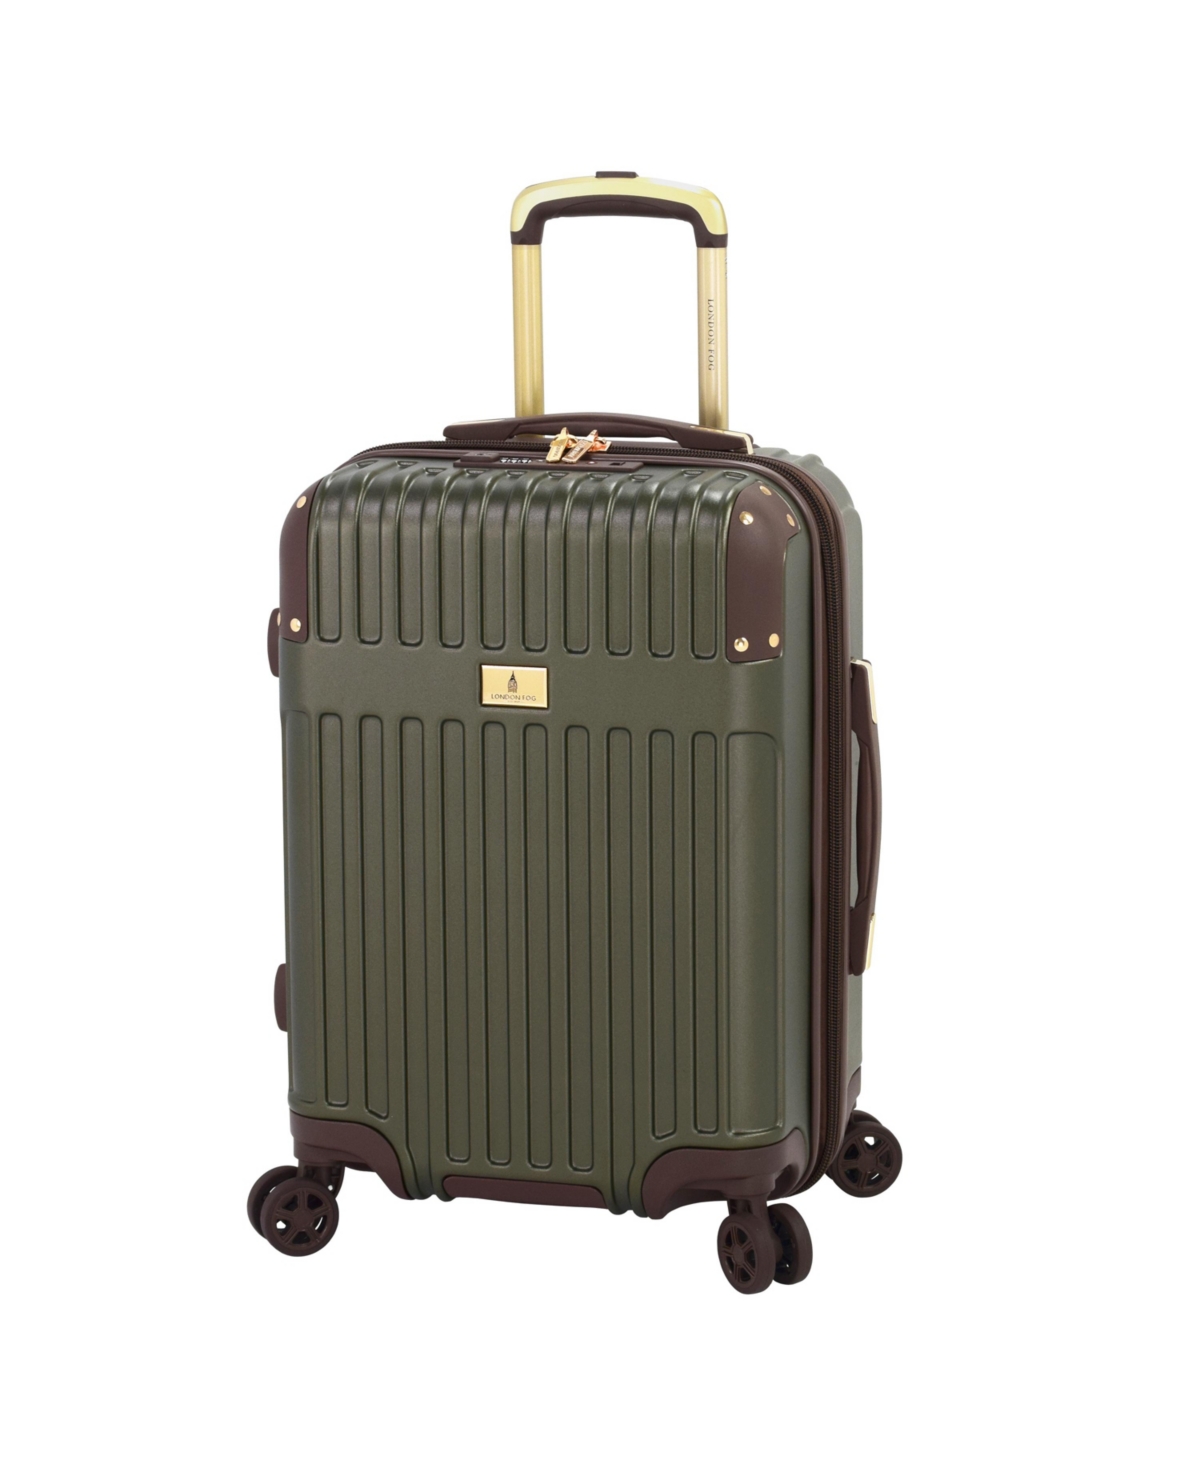 Brentwood Iii 20" Expandable Spinner Carry-On Hardside, Created for Macy's - Navy